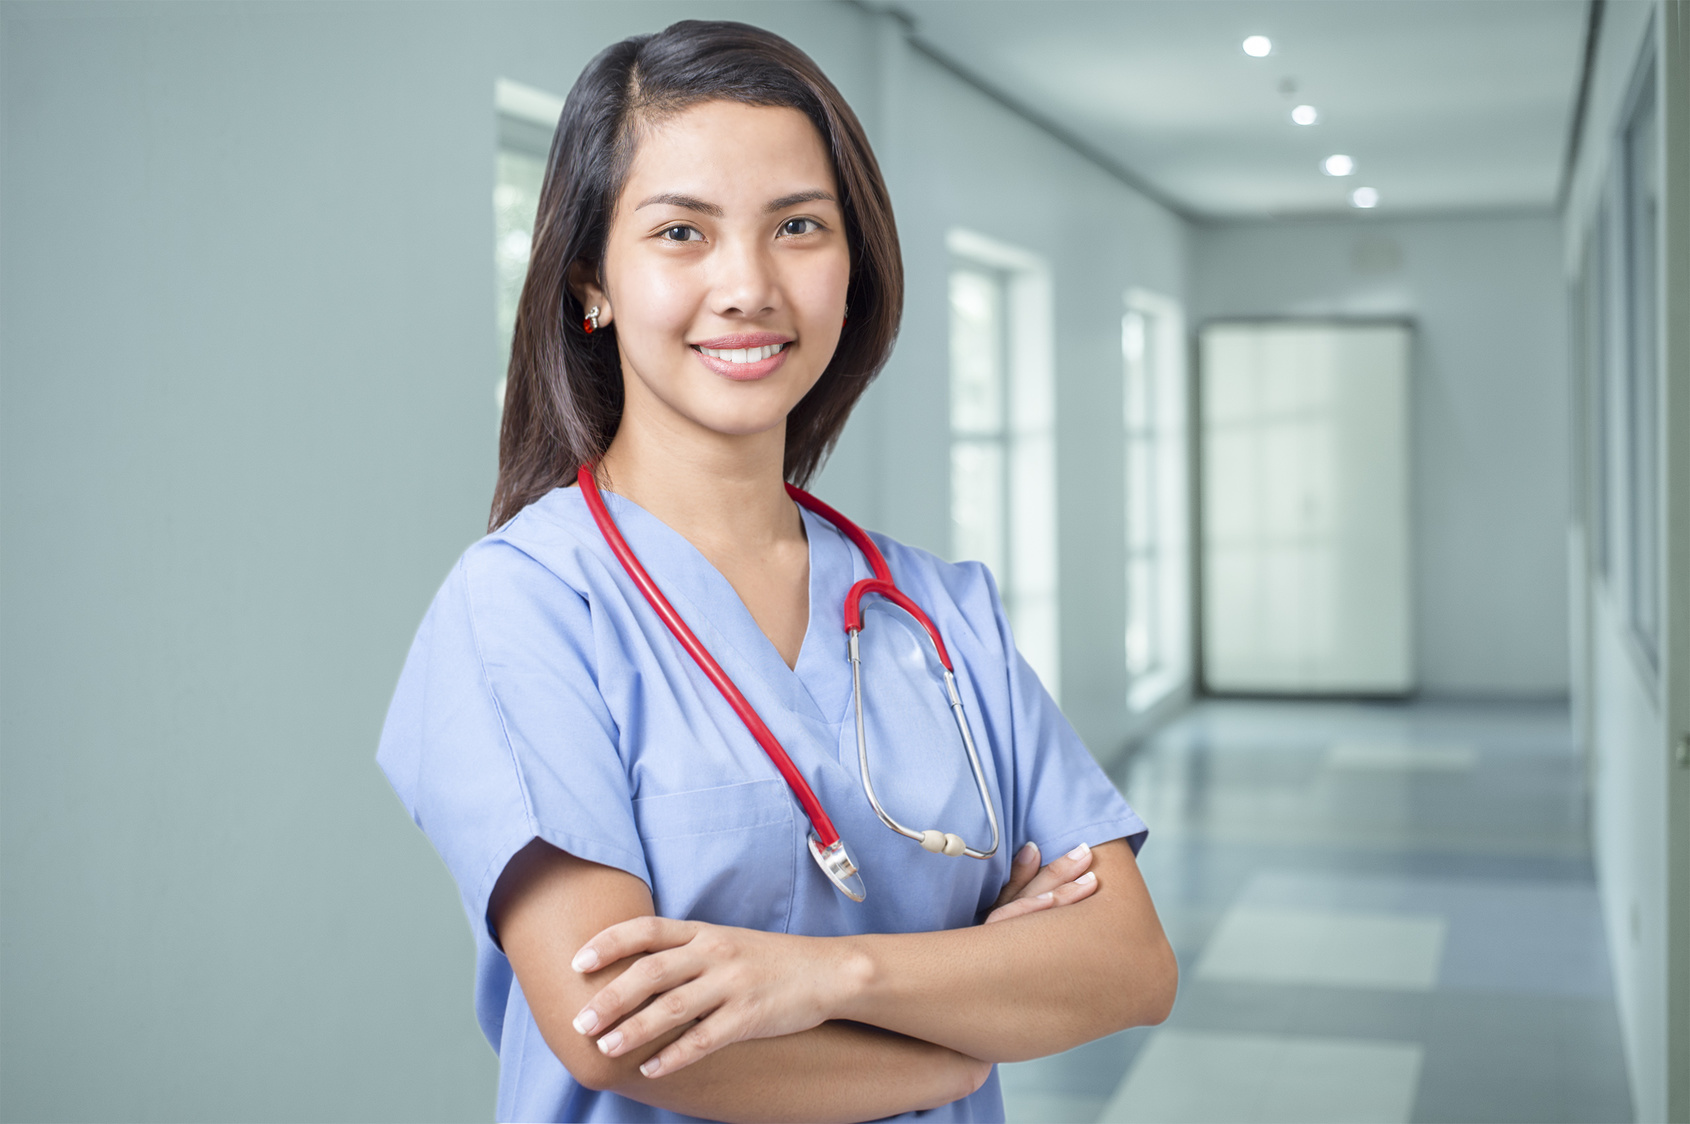 4 Career Options That Don’t Require Traditional Medical Schooling